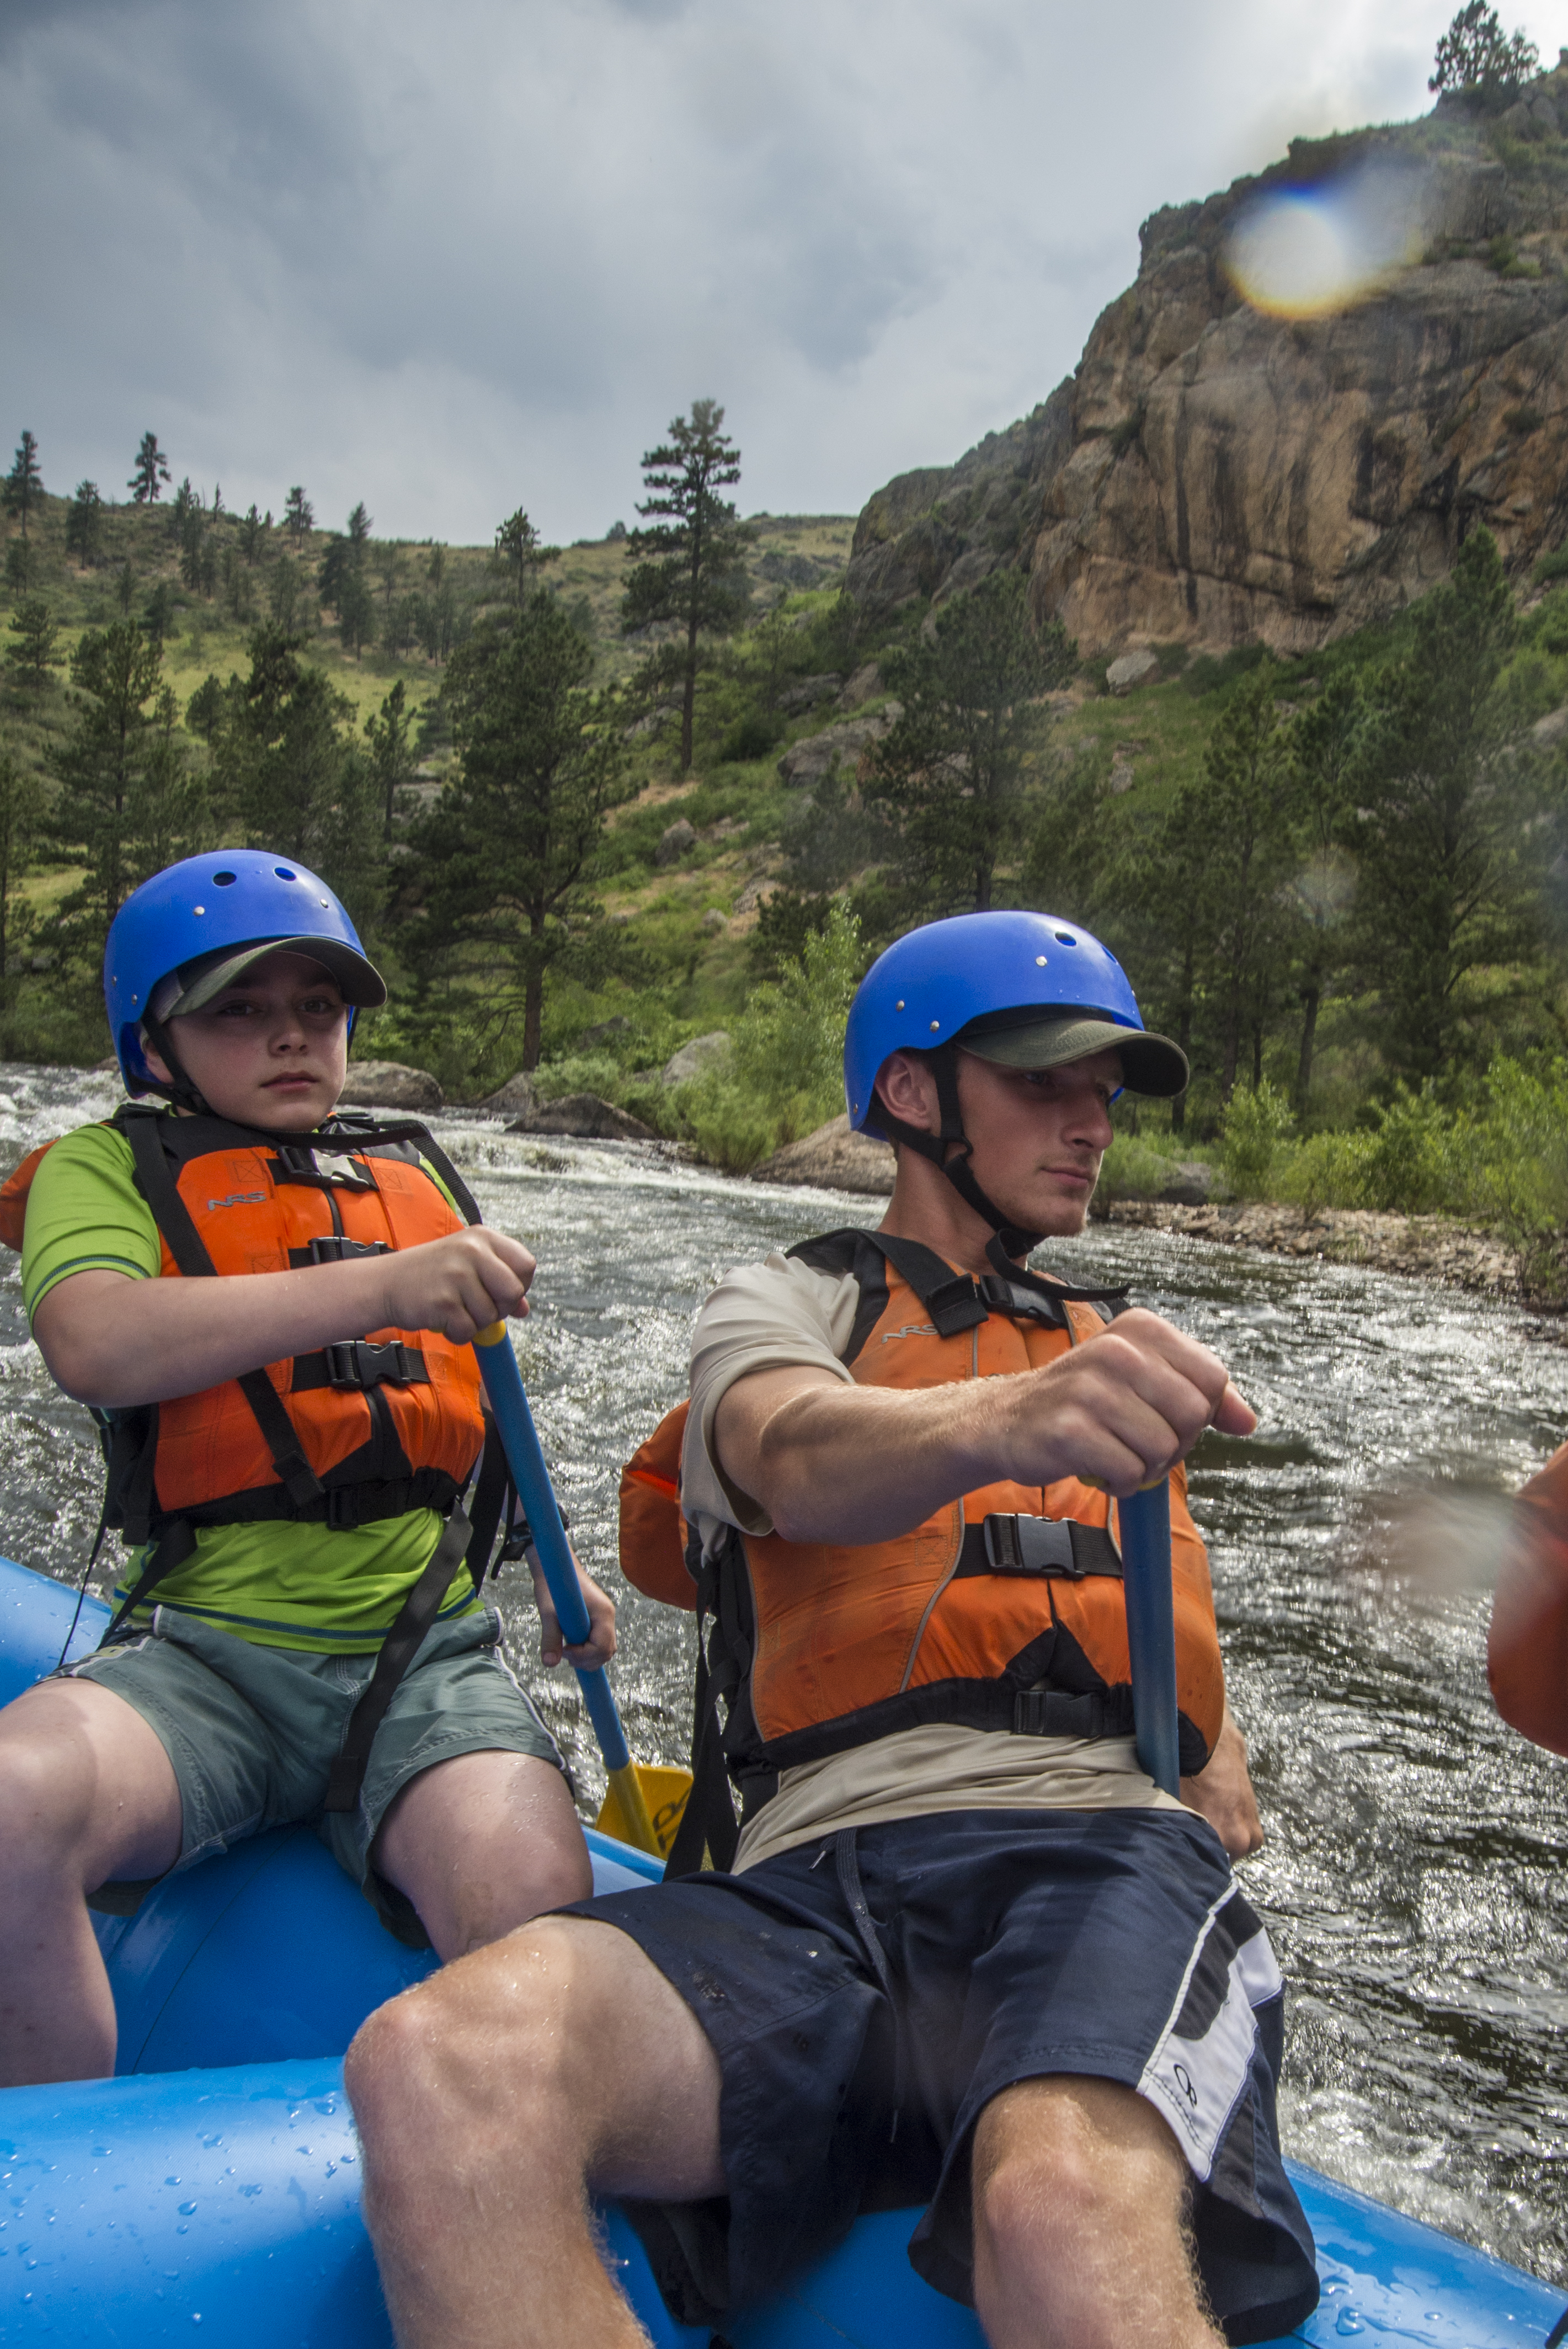 Scouts from PA enjoy a whitewater rafting trip on the Cache La Poudre River, during their adventure trip to Colorado